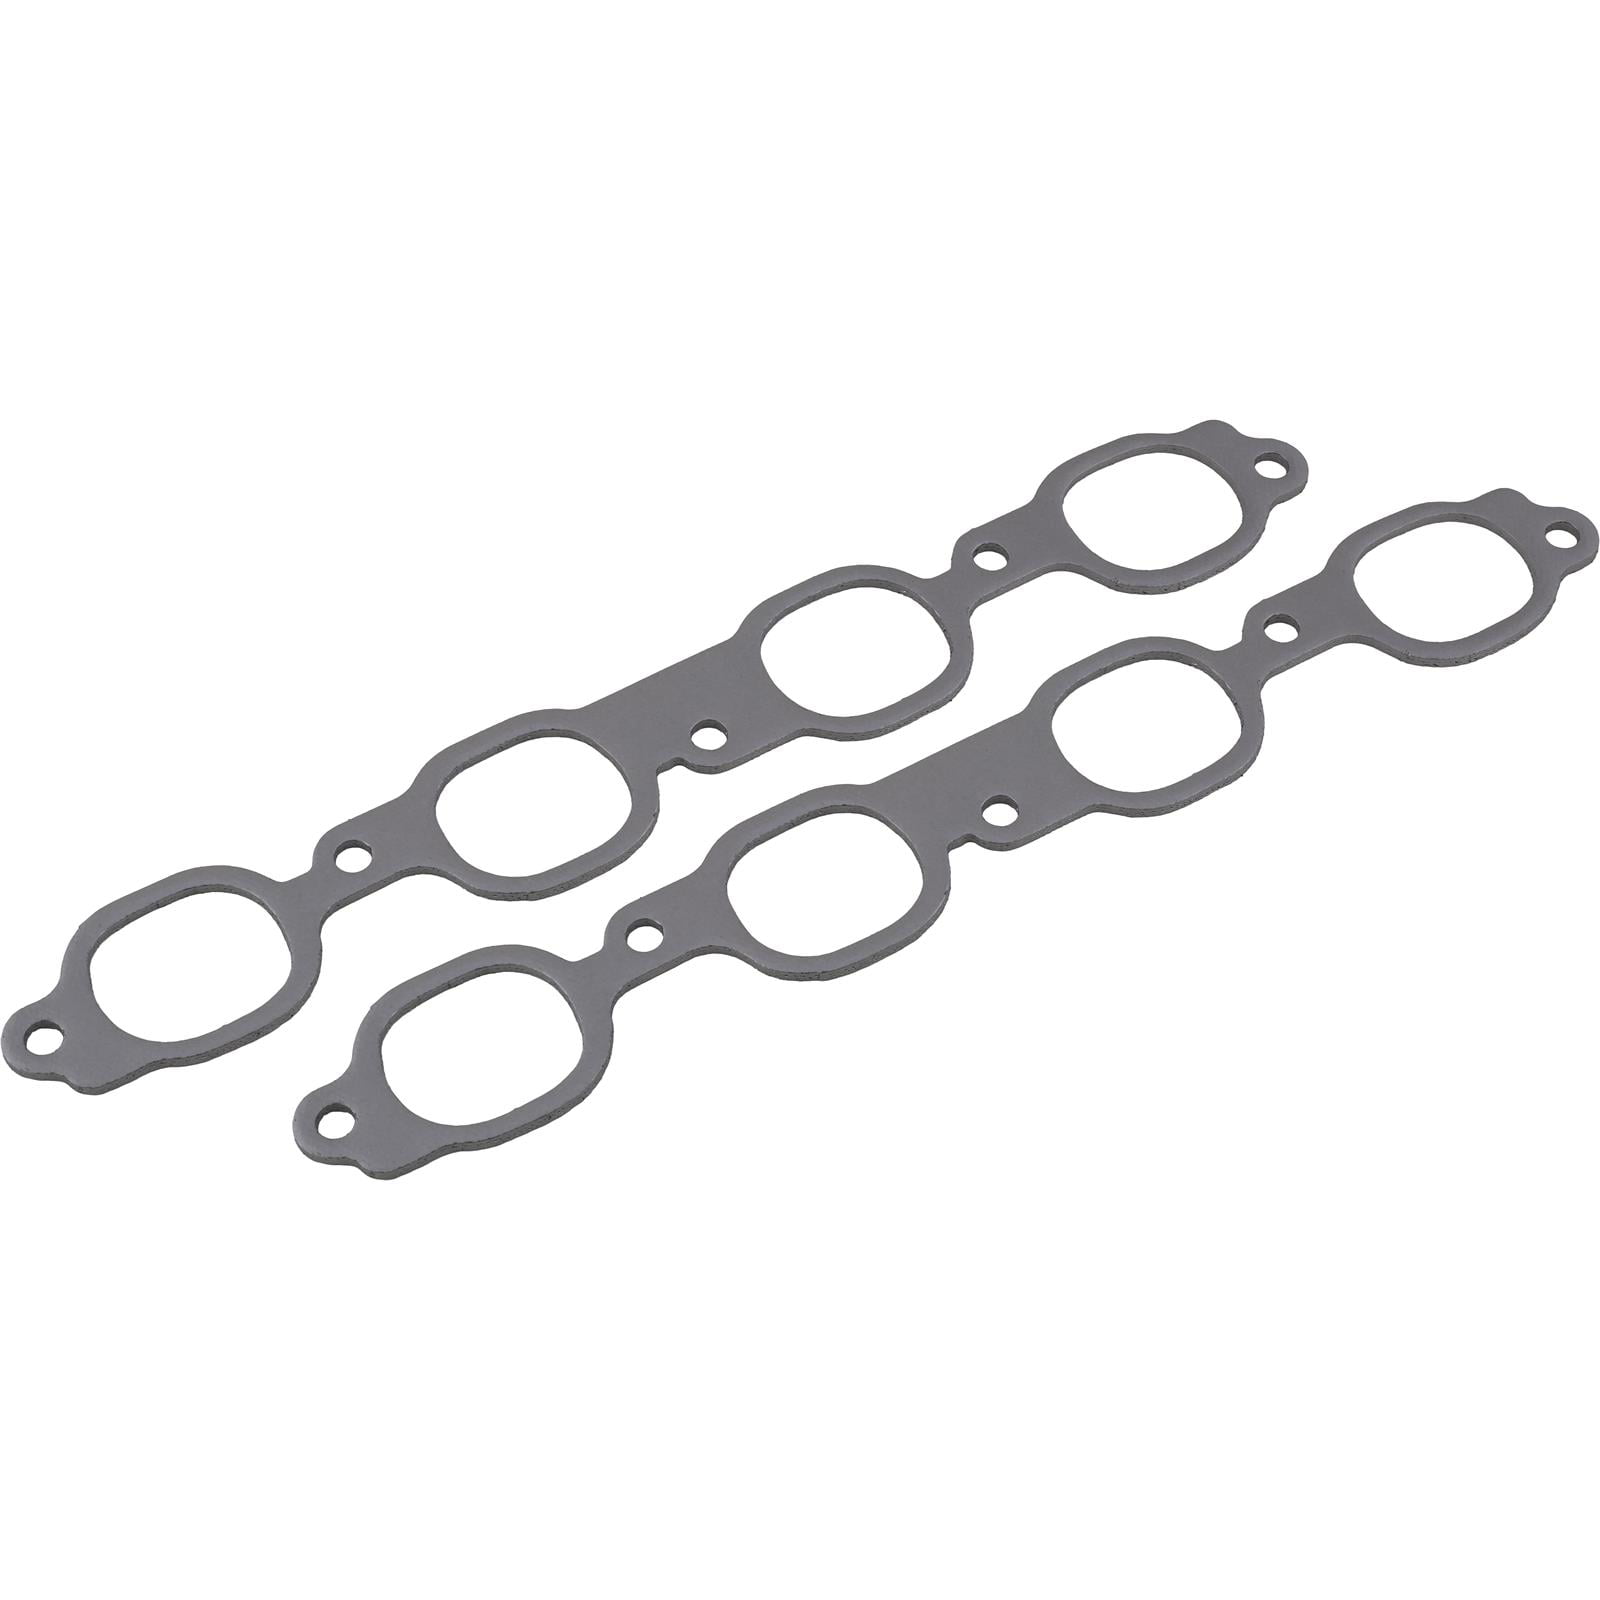 Remflex 2015 Exhaust Gasket for Chevy V8 Engine, Set of 2 